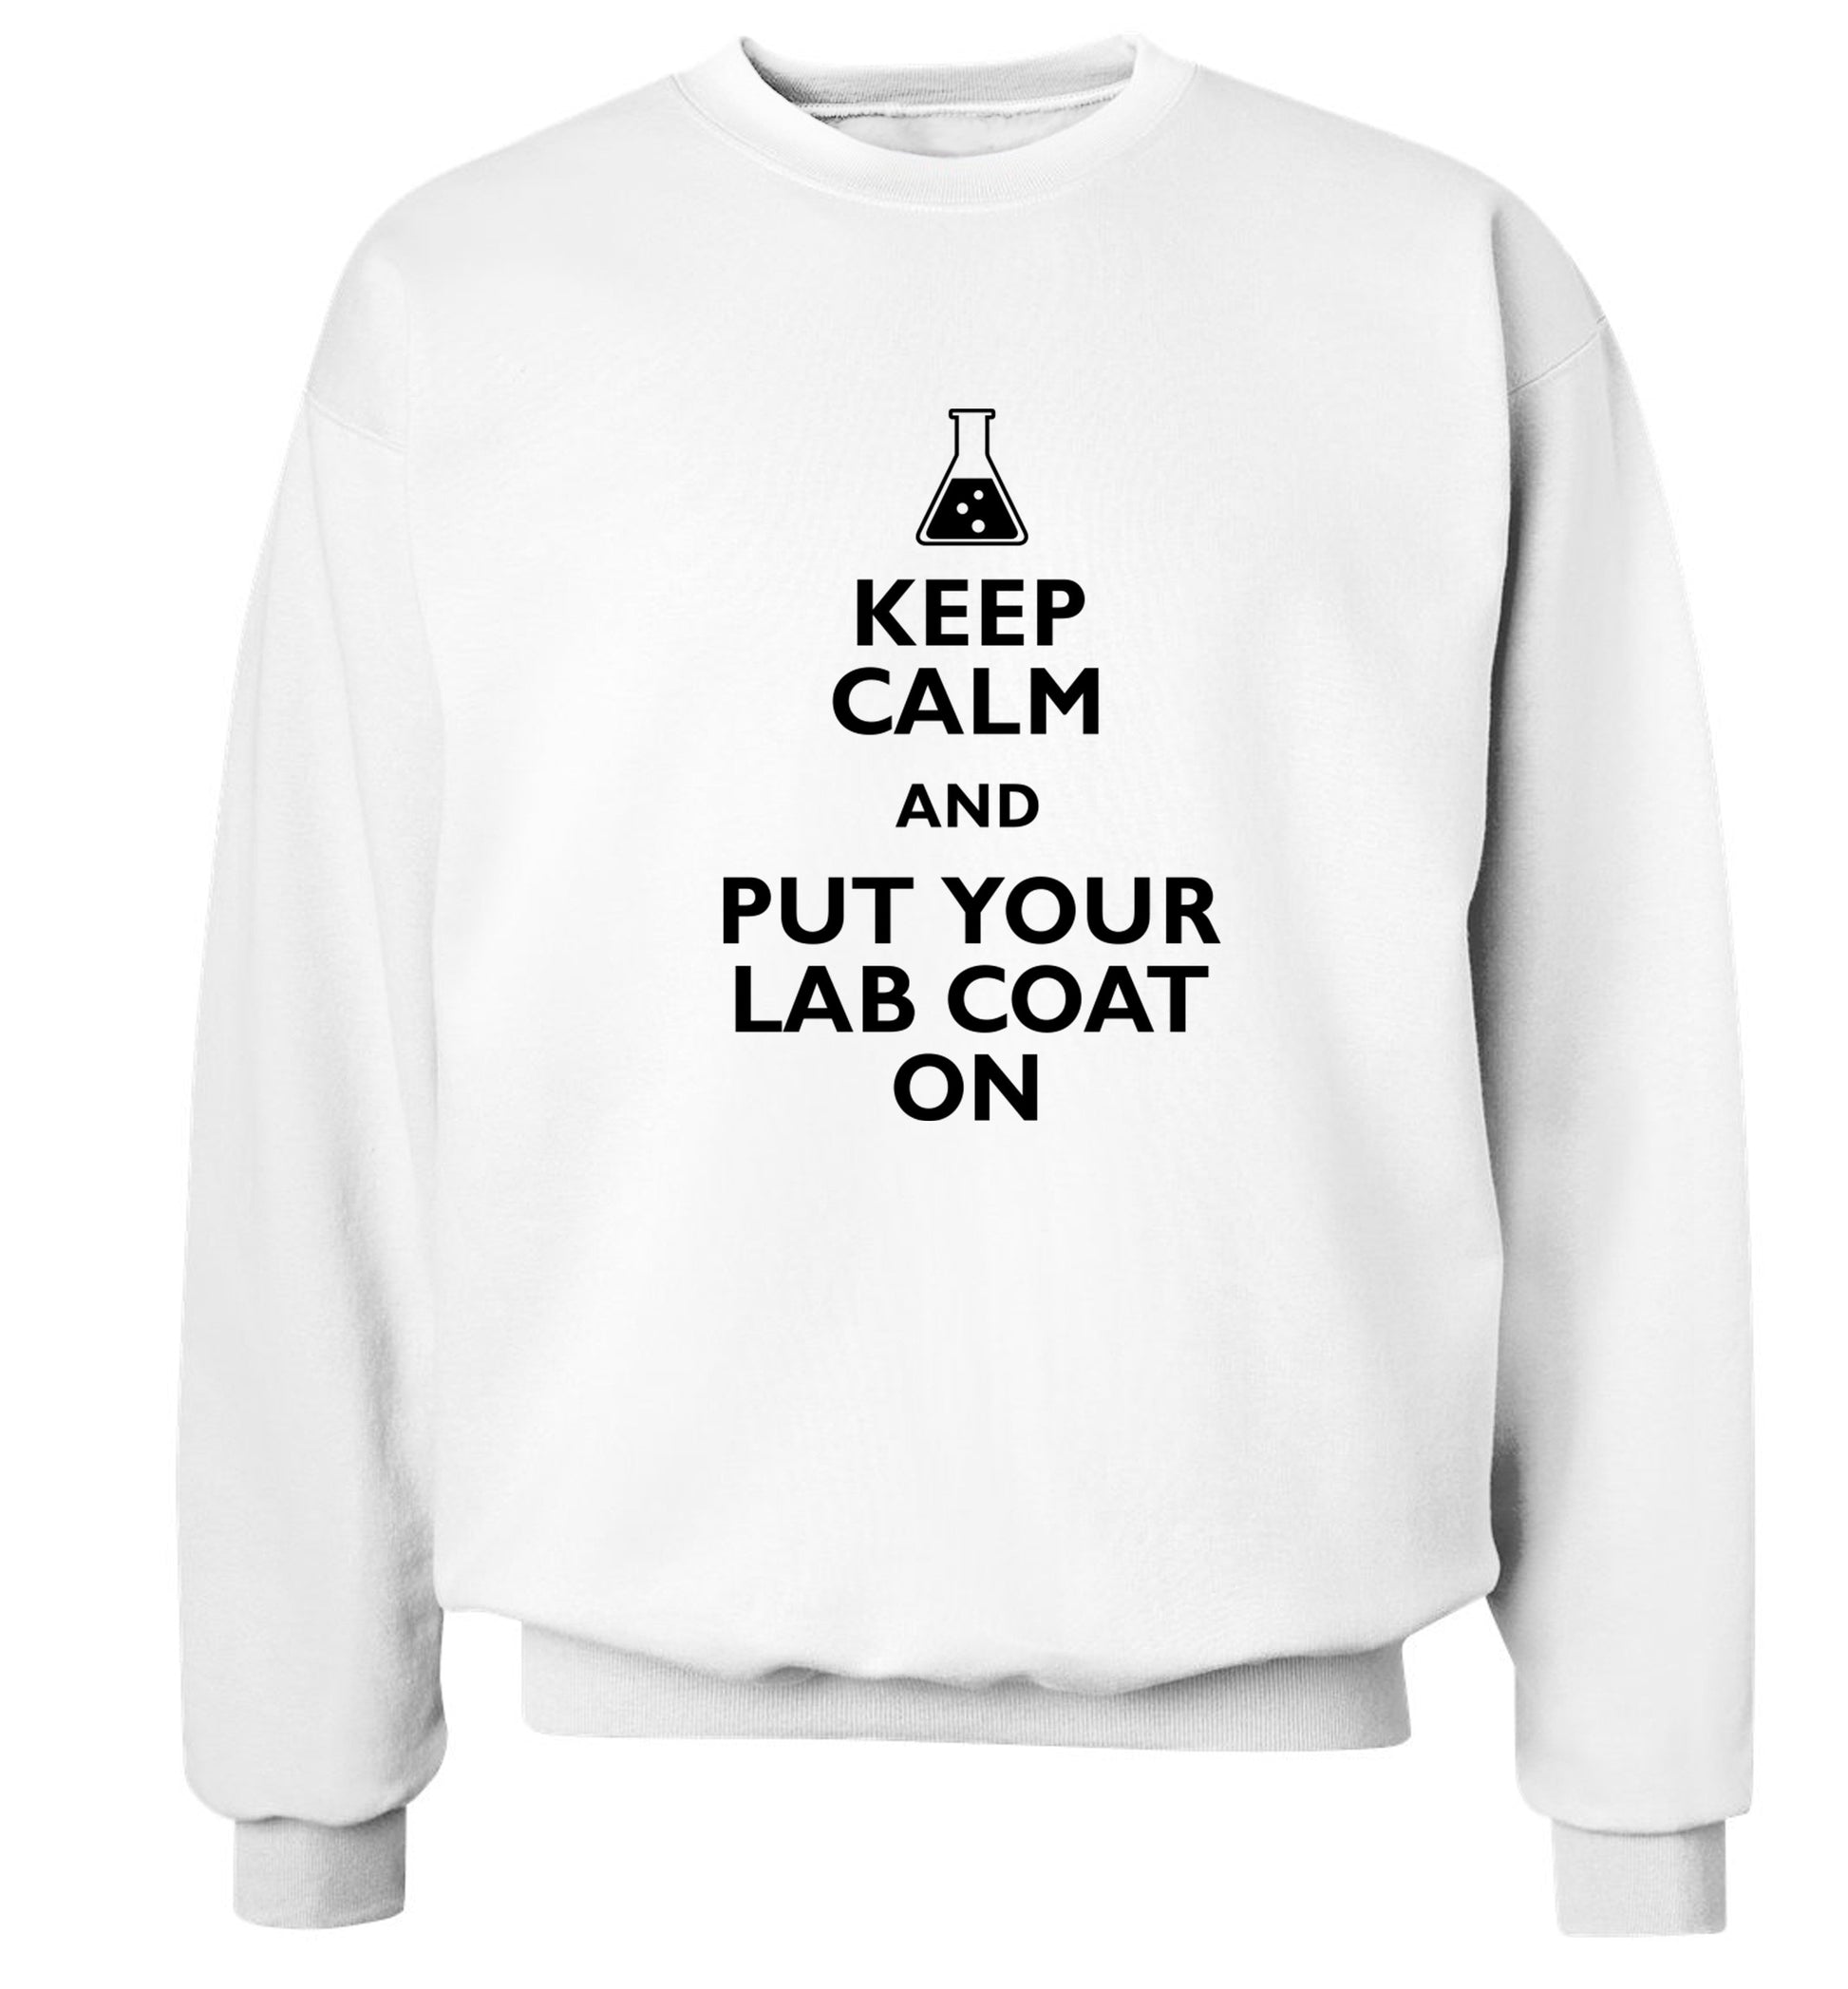 Keep calm and put your lab coat on Adult's unisex white Sweater 2XL